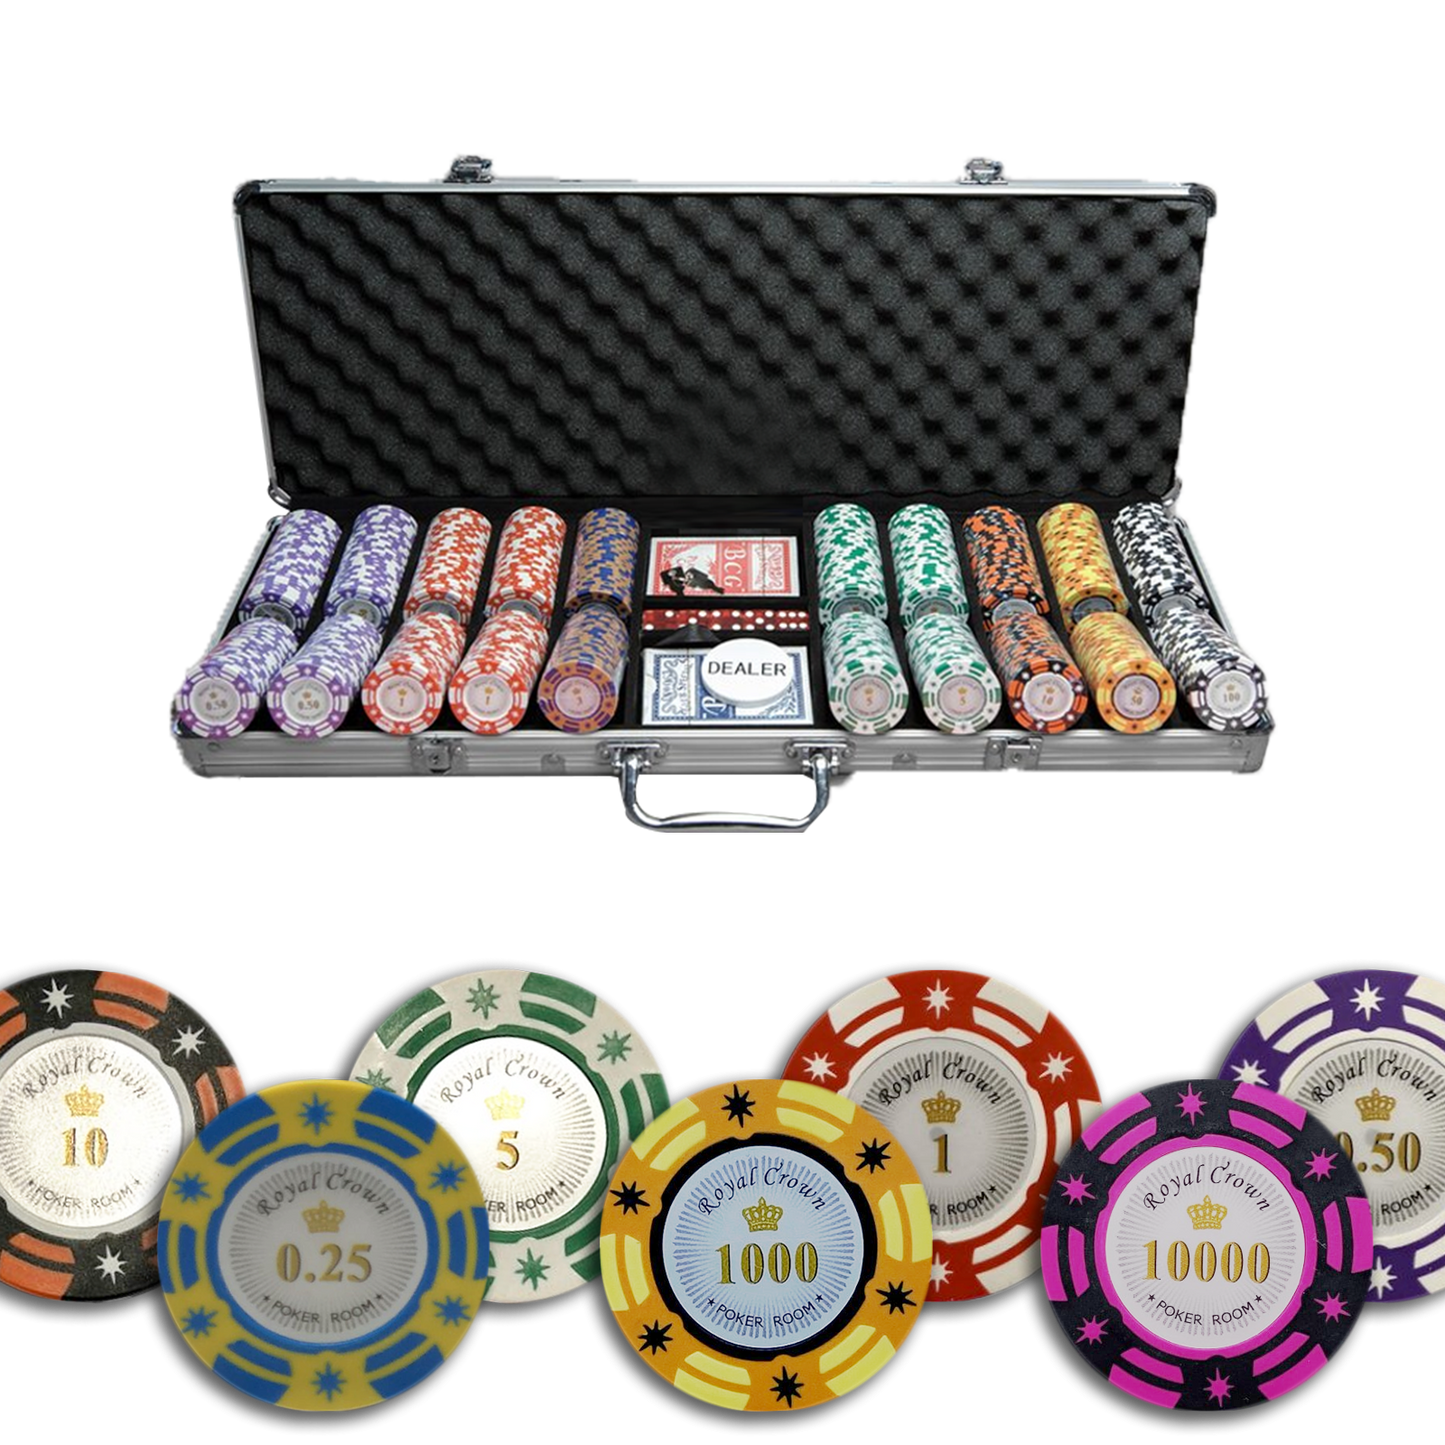 Royal Crown Pokerkoffer mit 500 Chips